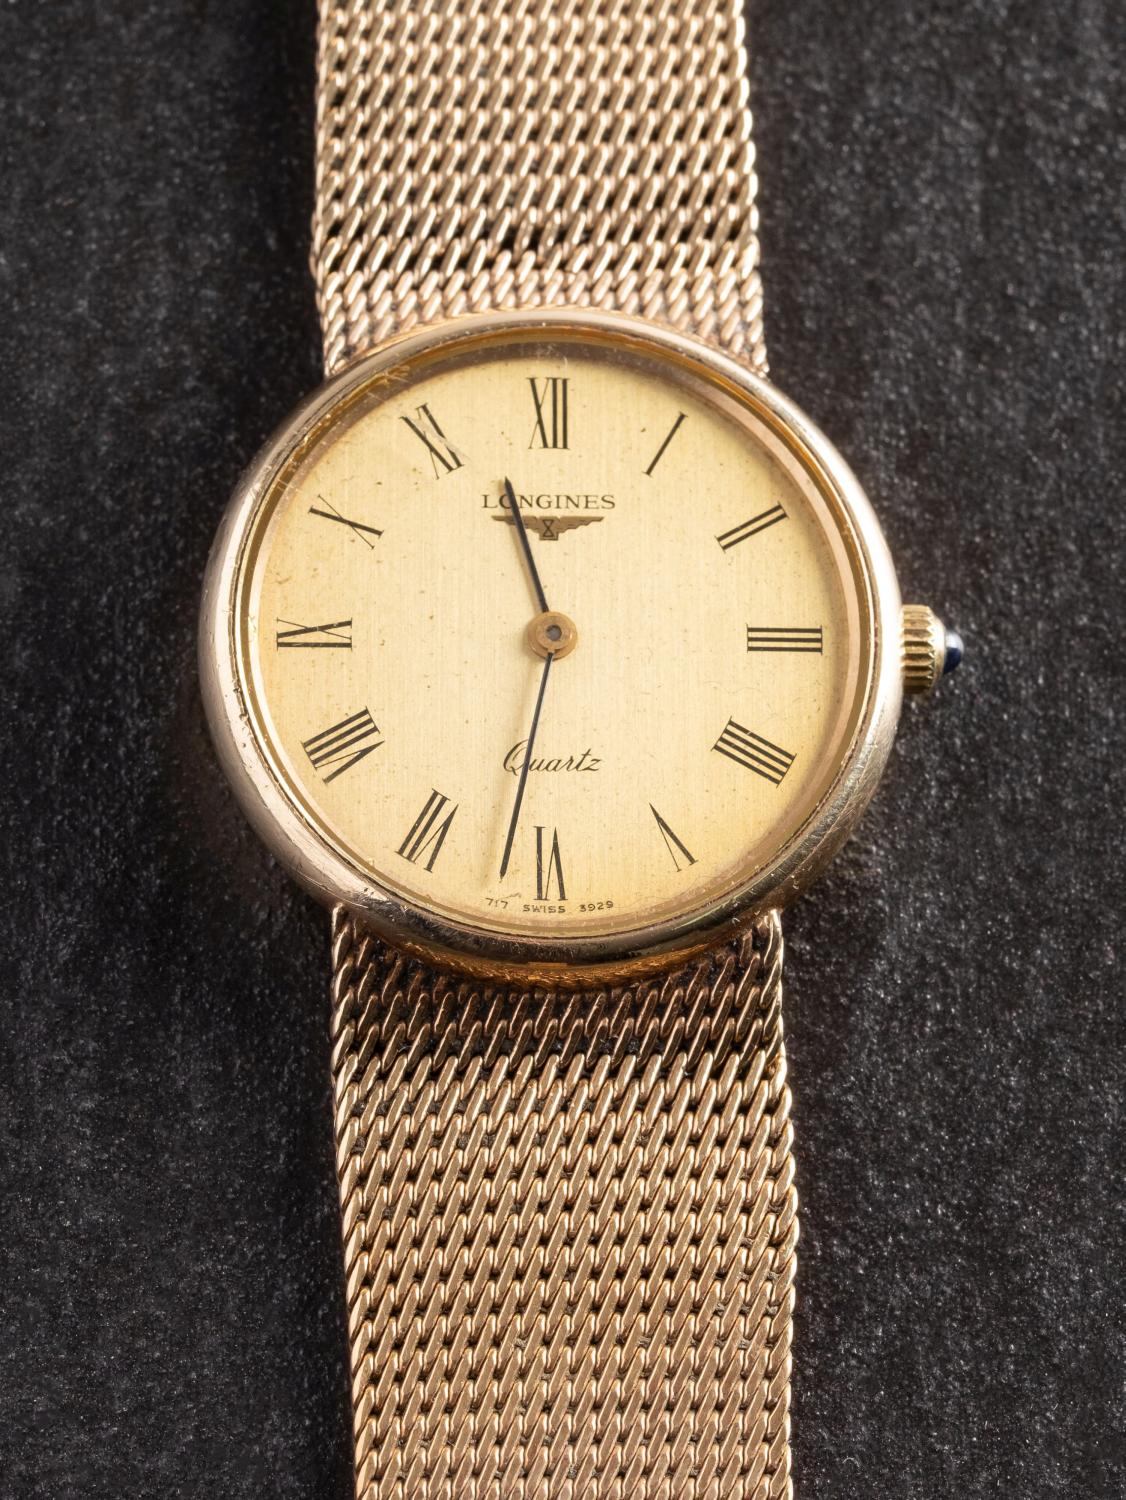 Longines, a gold gentlemans wristwatch the dial with black Roman numerals,